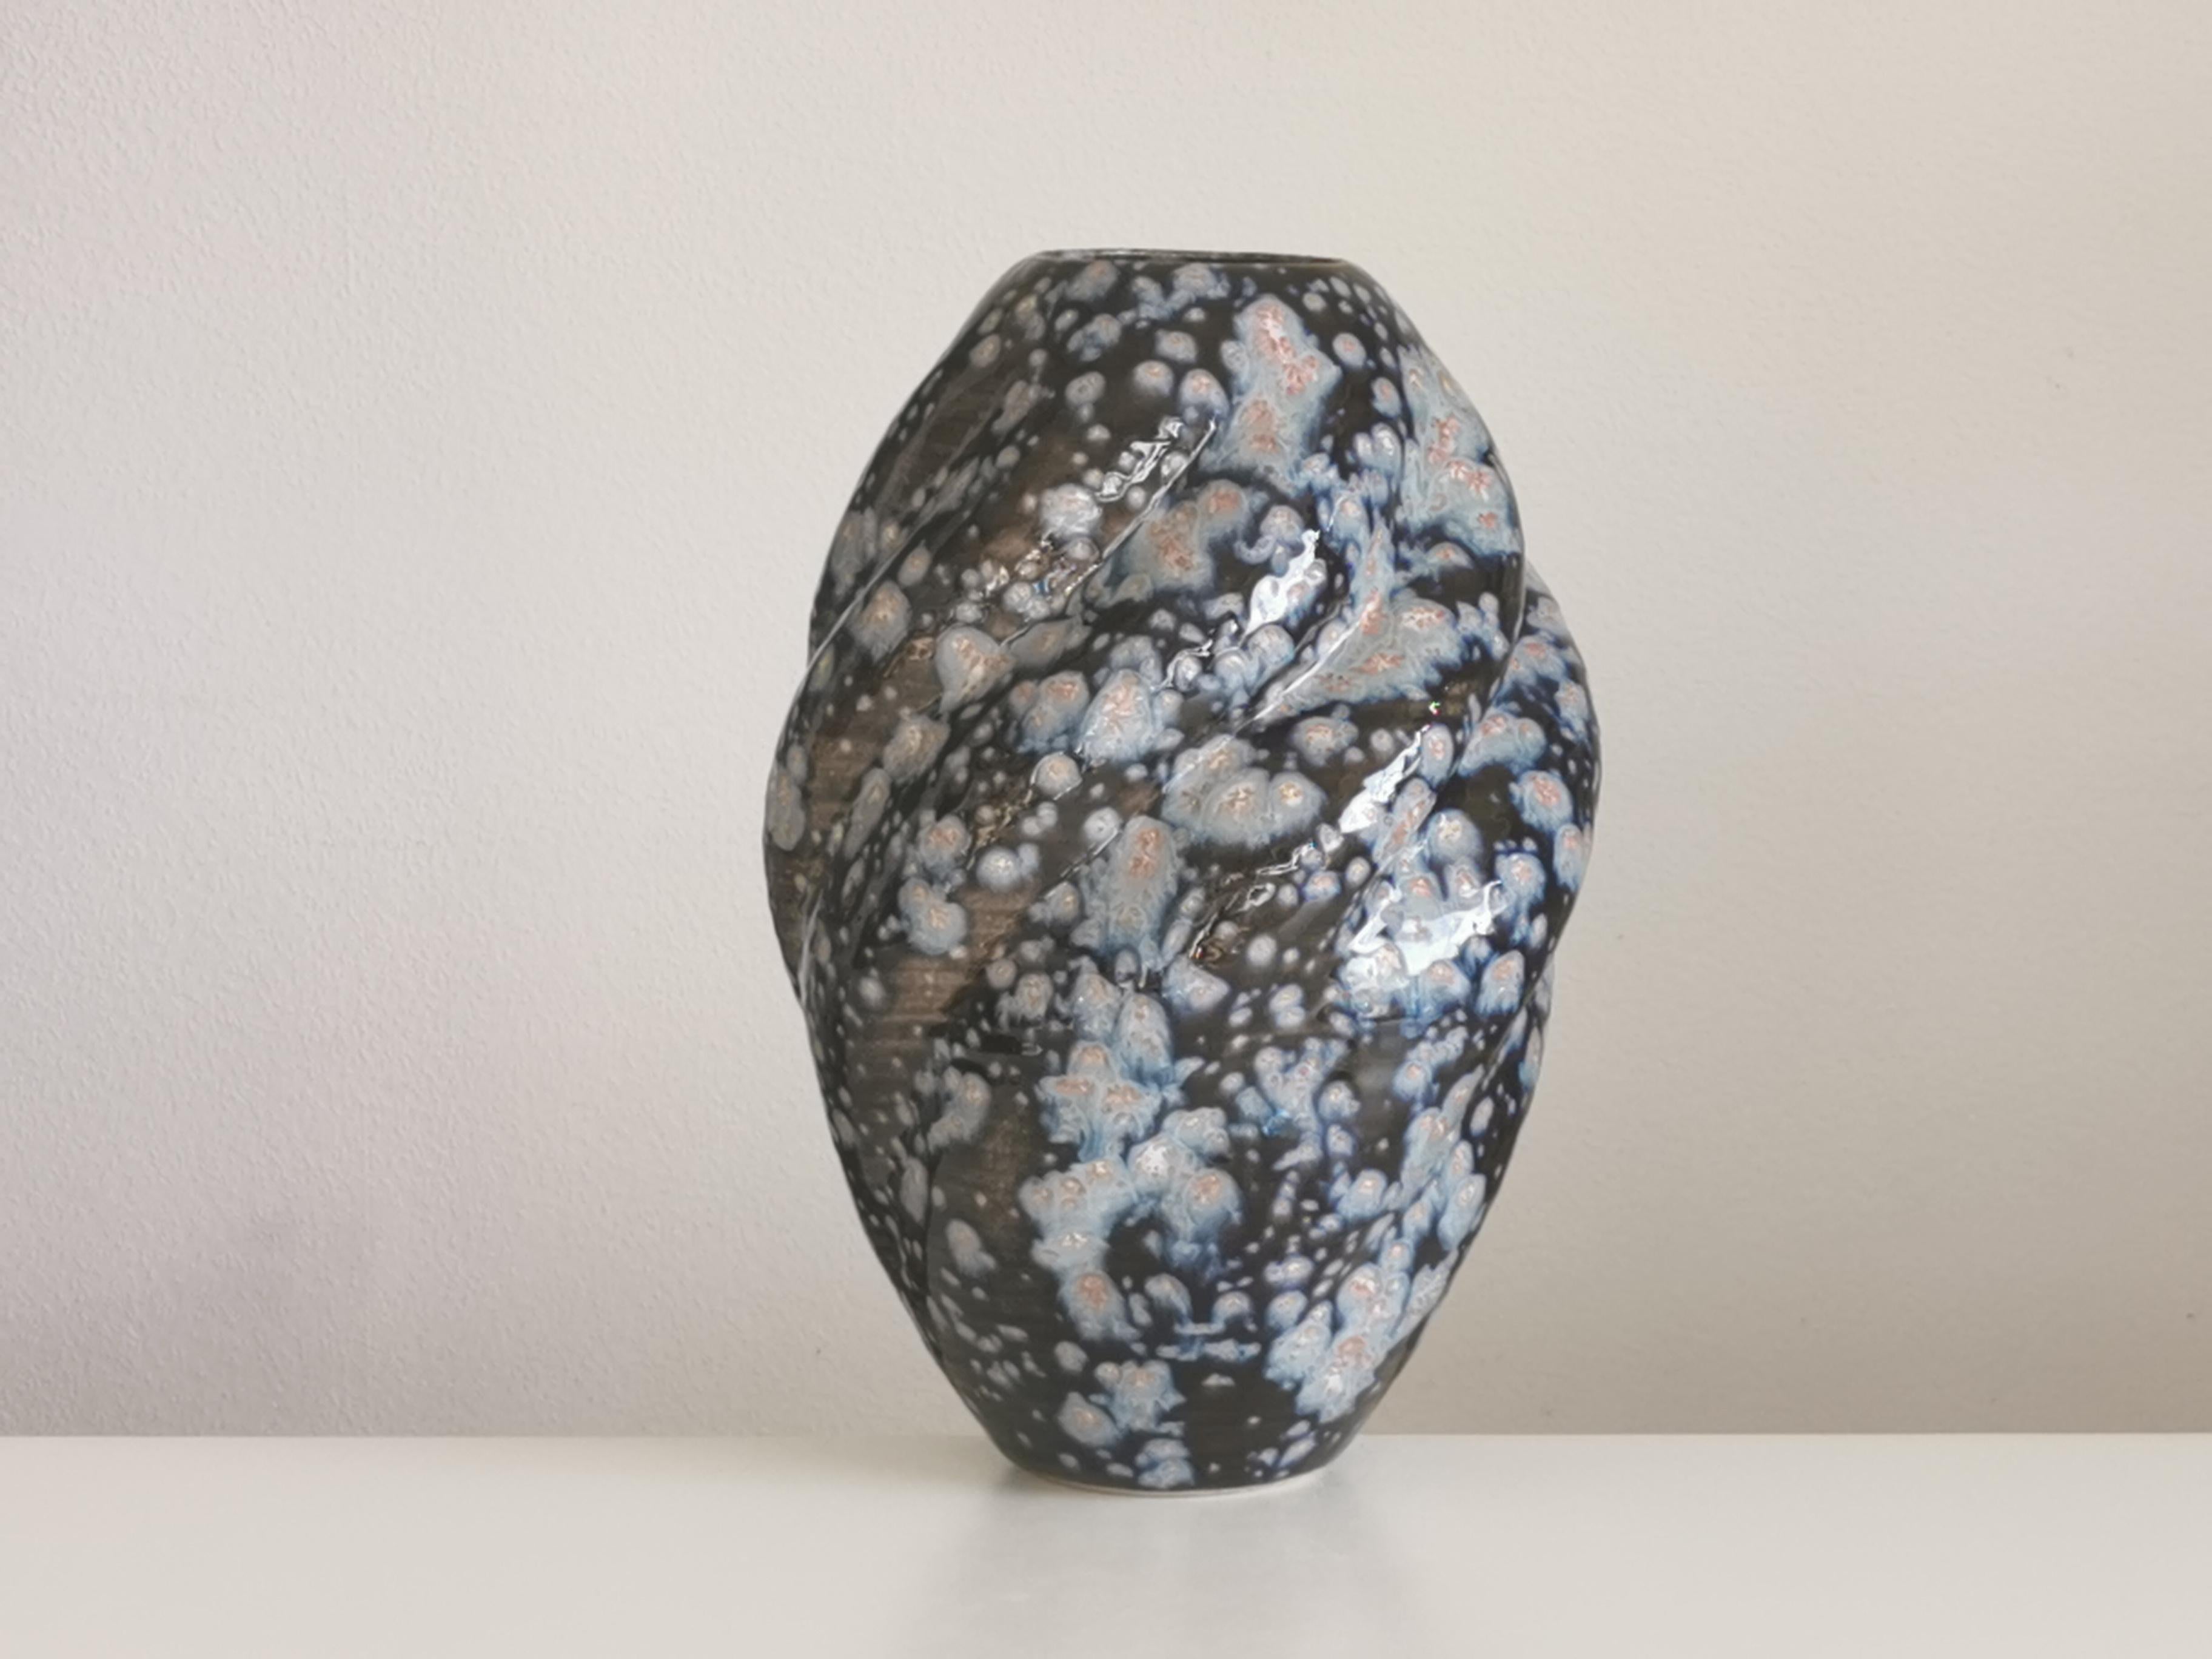 No. 90 tall wave form with a blue galactic glaze. Sumptuous medium sized ceramic vessel from ceramic artist Nicholas Arroyave-Portela.

White St.Thomas clay, Stoneware glazes, multi fired to cone 6 (1223 degrees)

Made in 2022

Measures: H 40